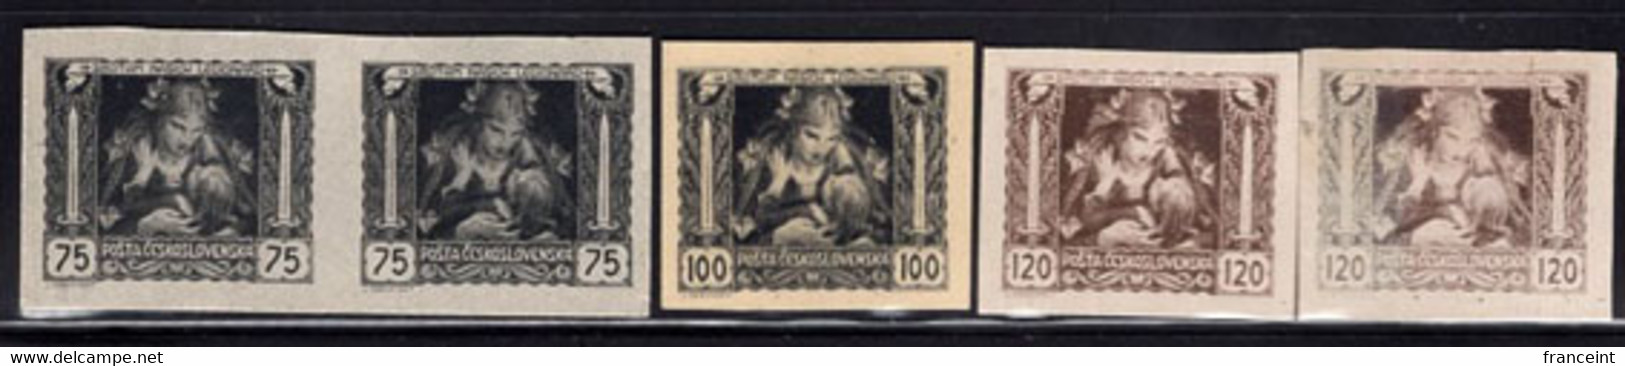 CZECHOSLOVAKIA(1919) Mother And Child. Set Of 5 Imperforate Proofs Printed On Card Stock. Scott Nos B127-9. - Proofs & Reprints